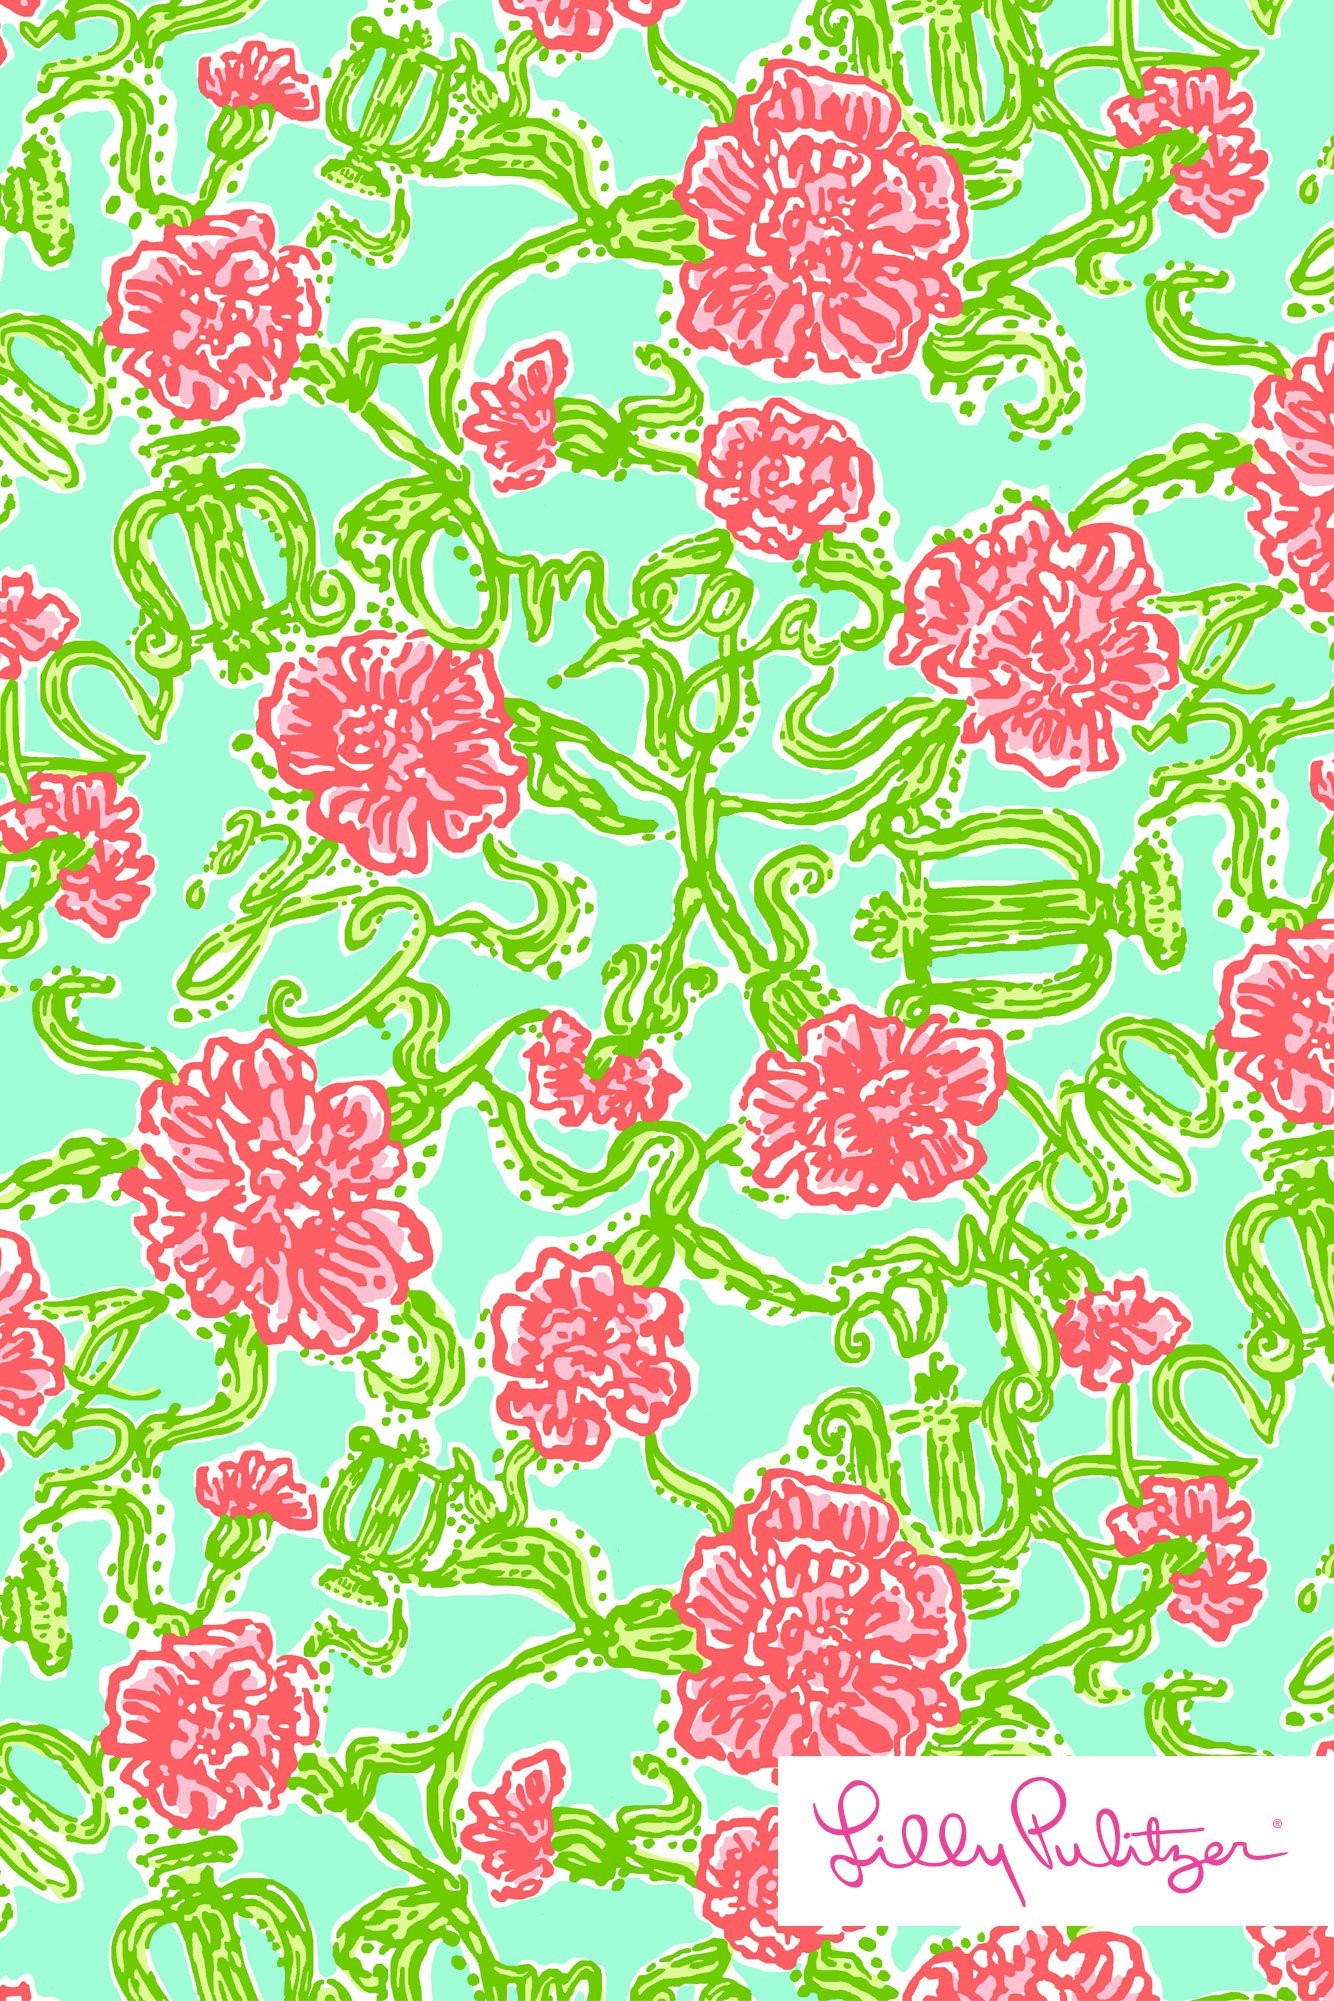 Lilly Pulitzer Iphone Backgrounds Quotes Lilly pulitzer